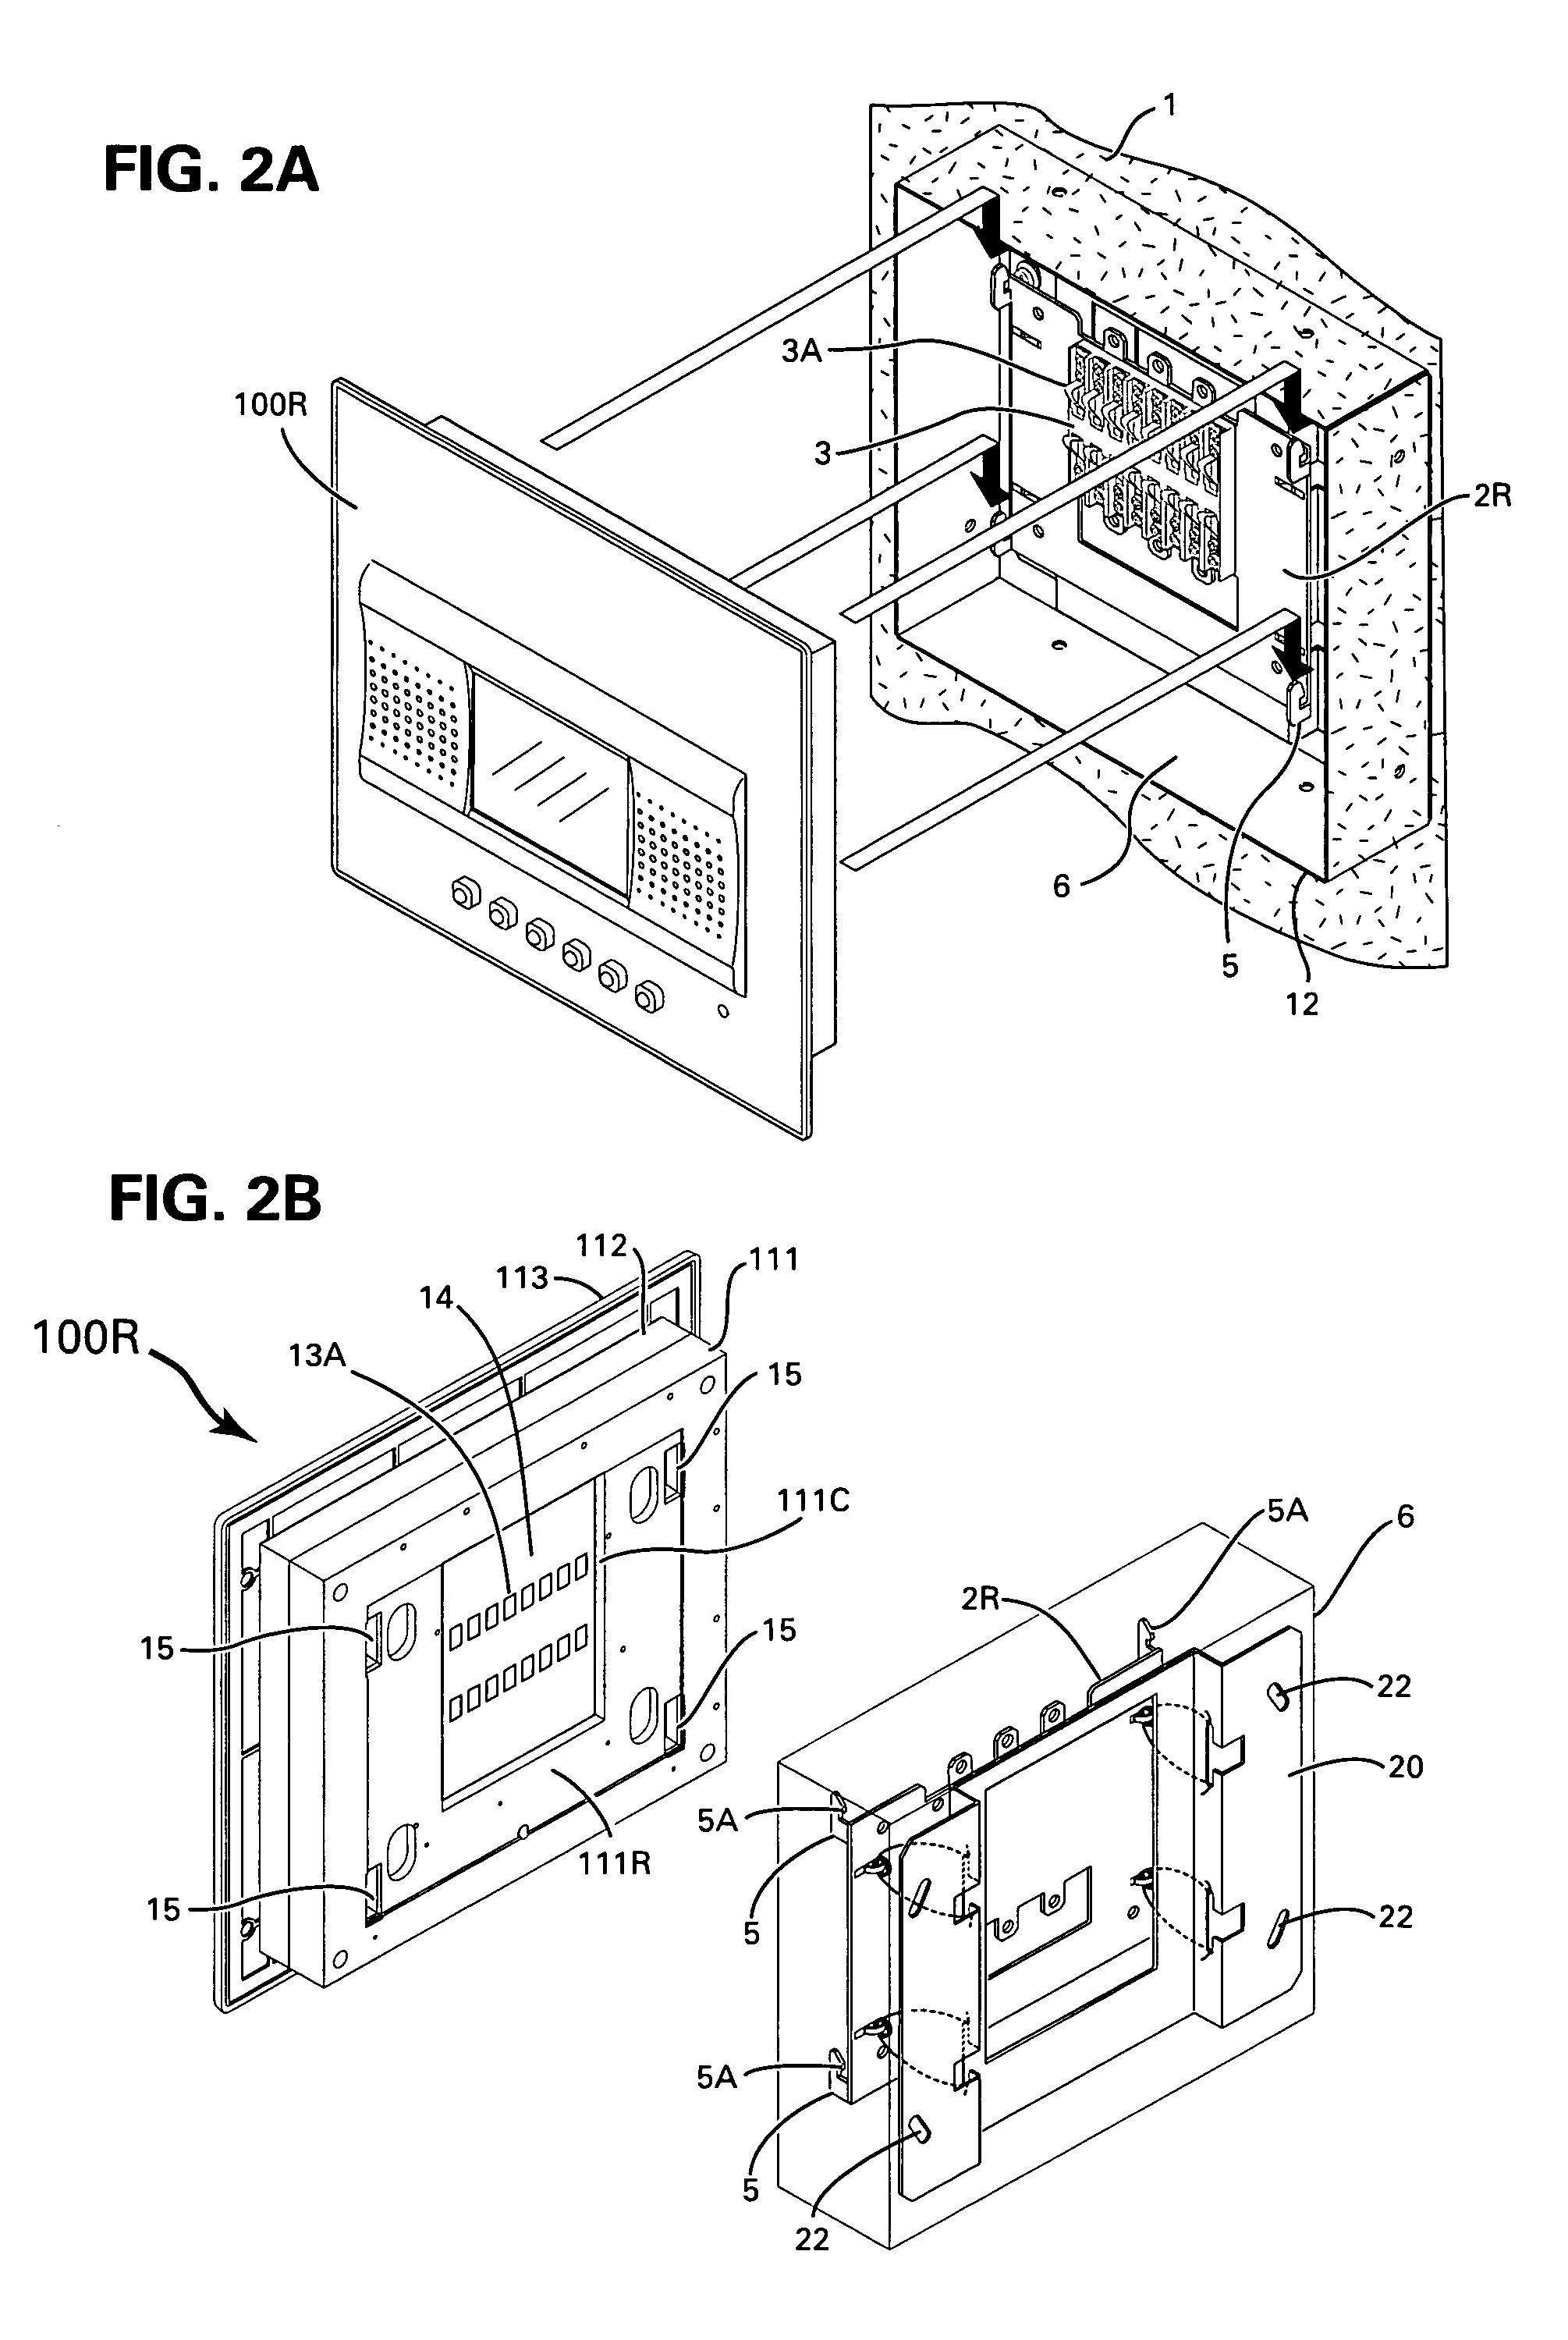 Method and apparatus for attaching display panels onto wall surface